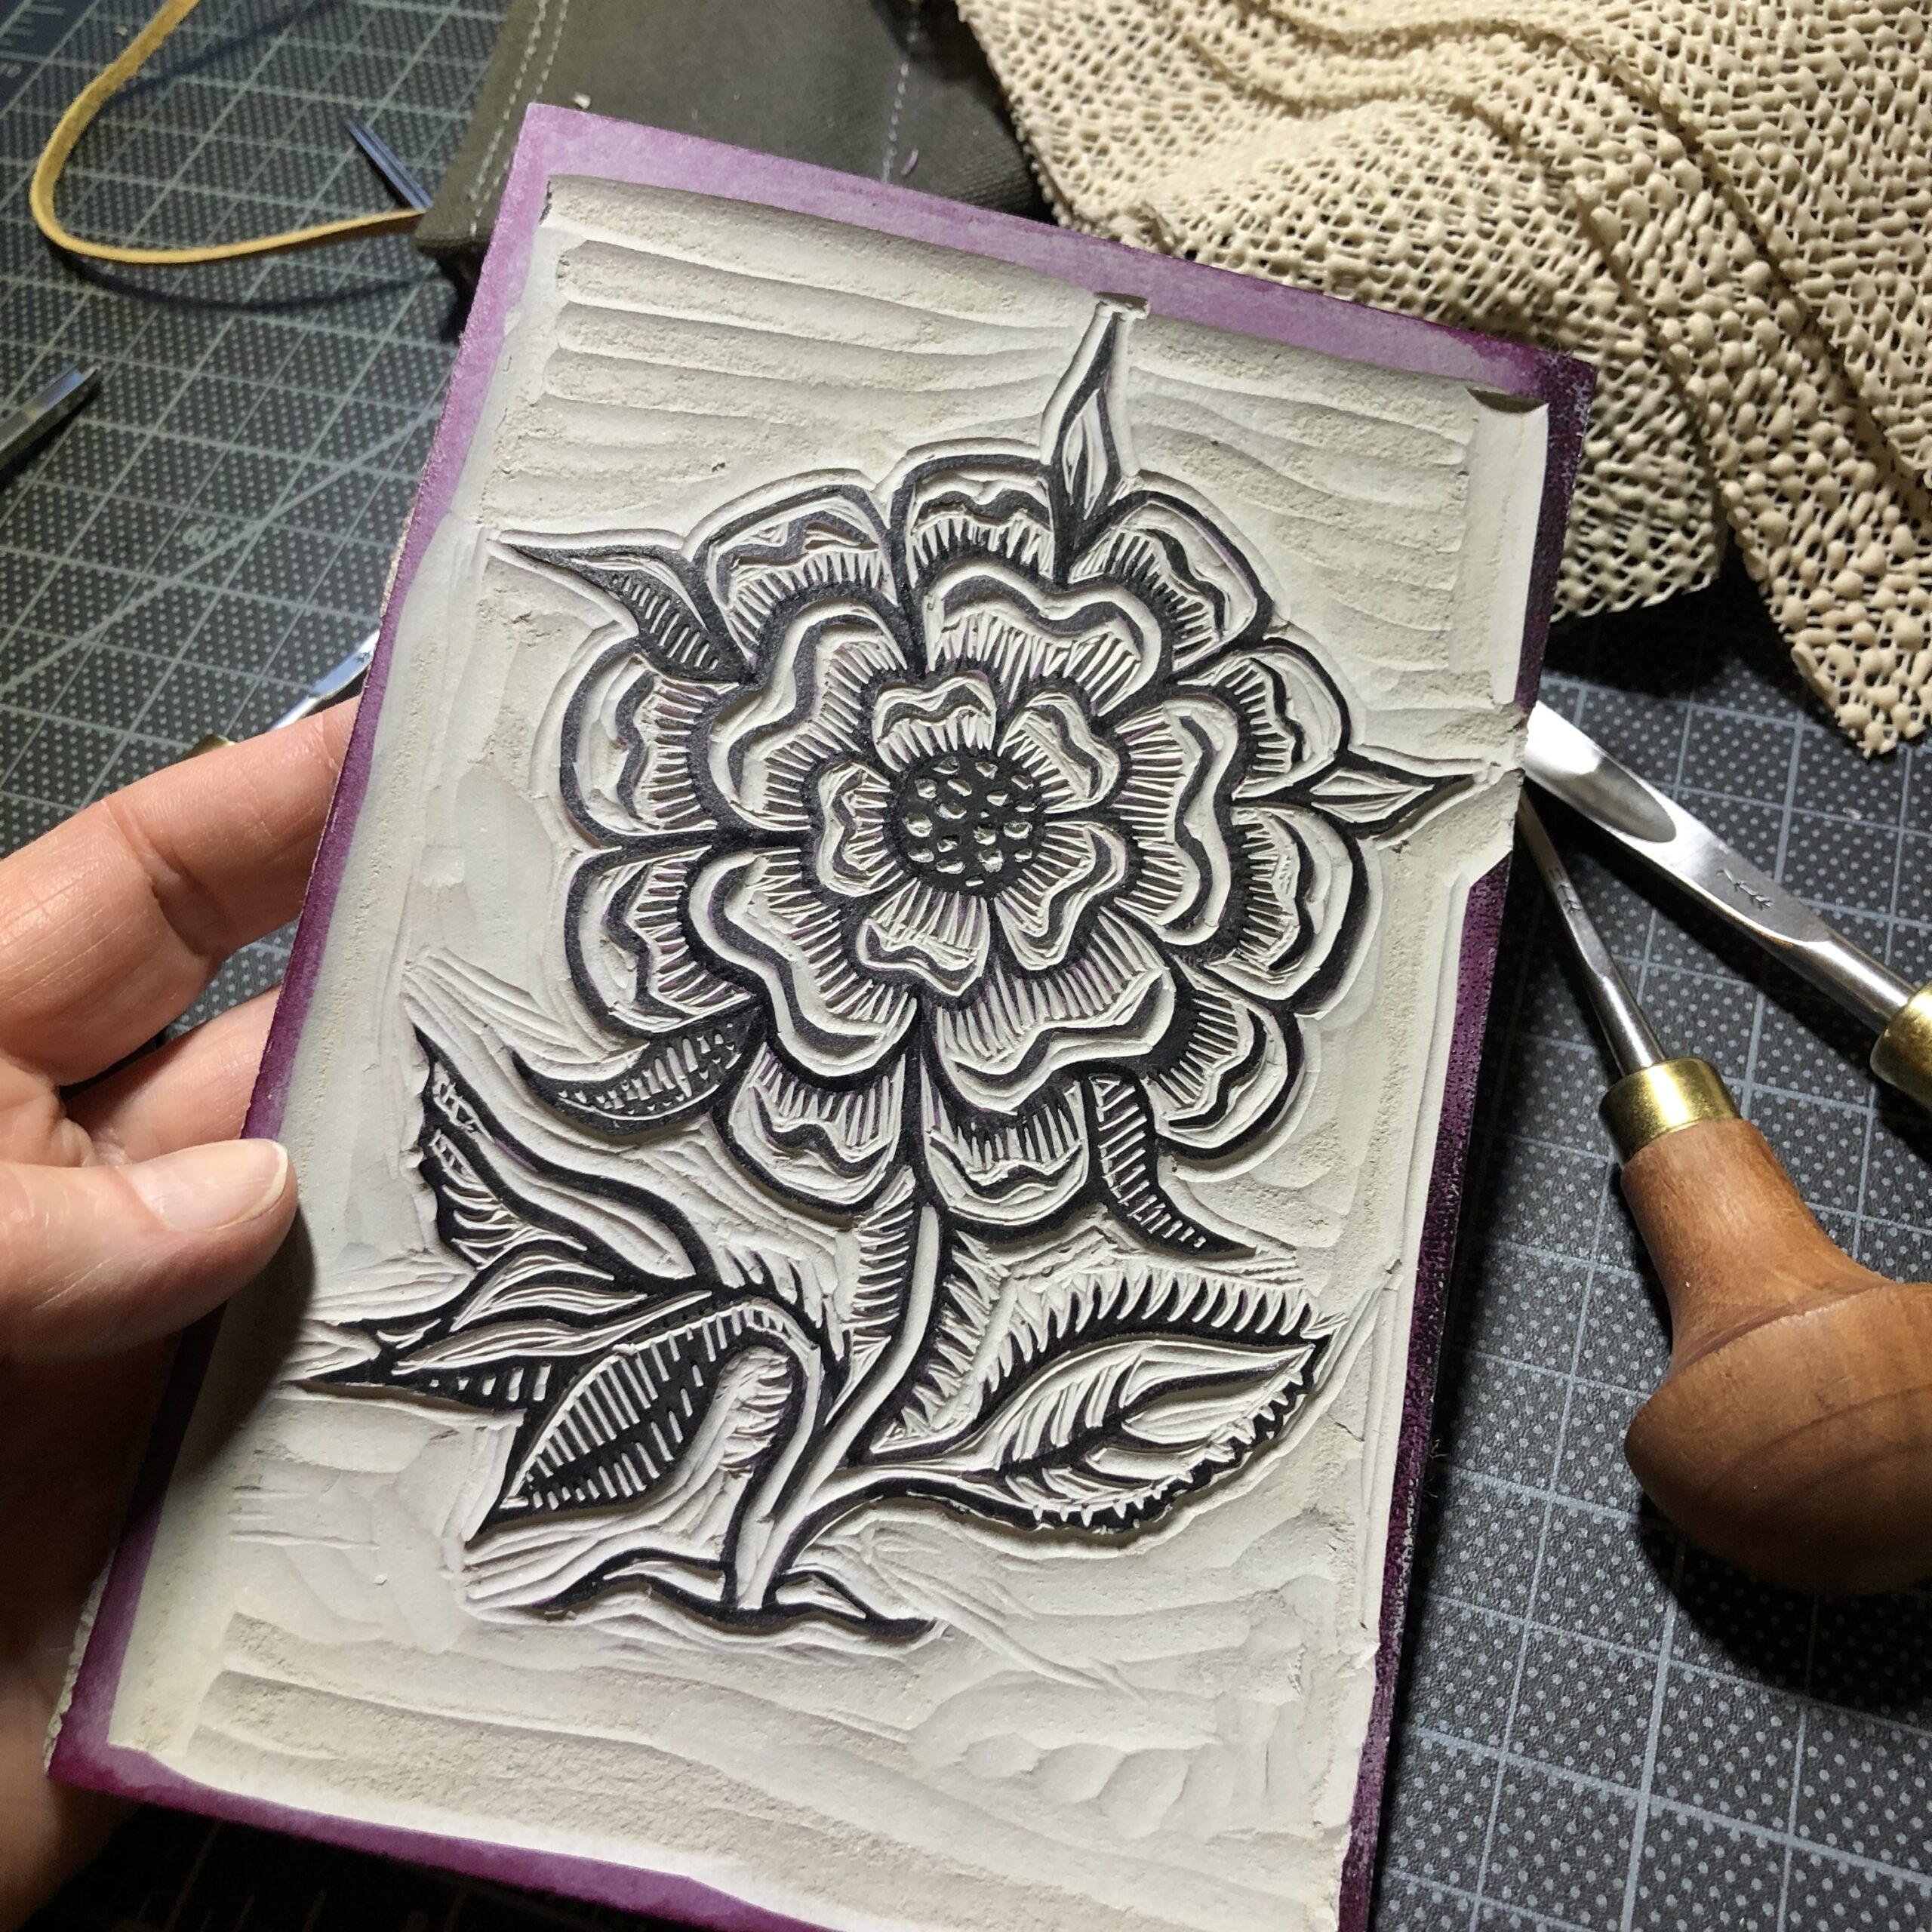 The handcarved linocut block for the wild rose, with cutting tools and nonslip mat to the right.